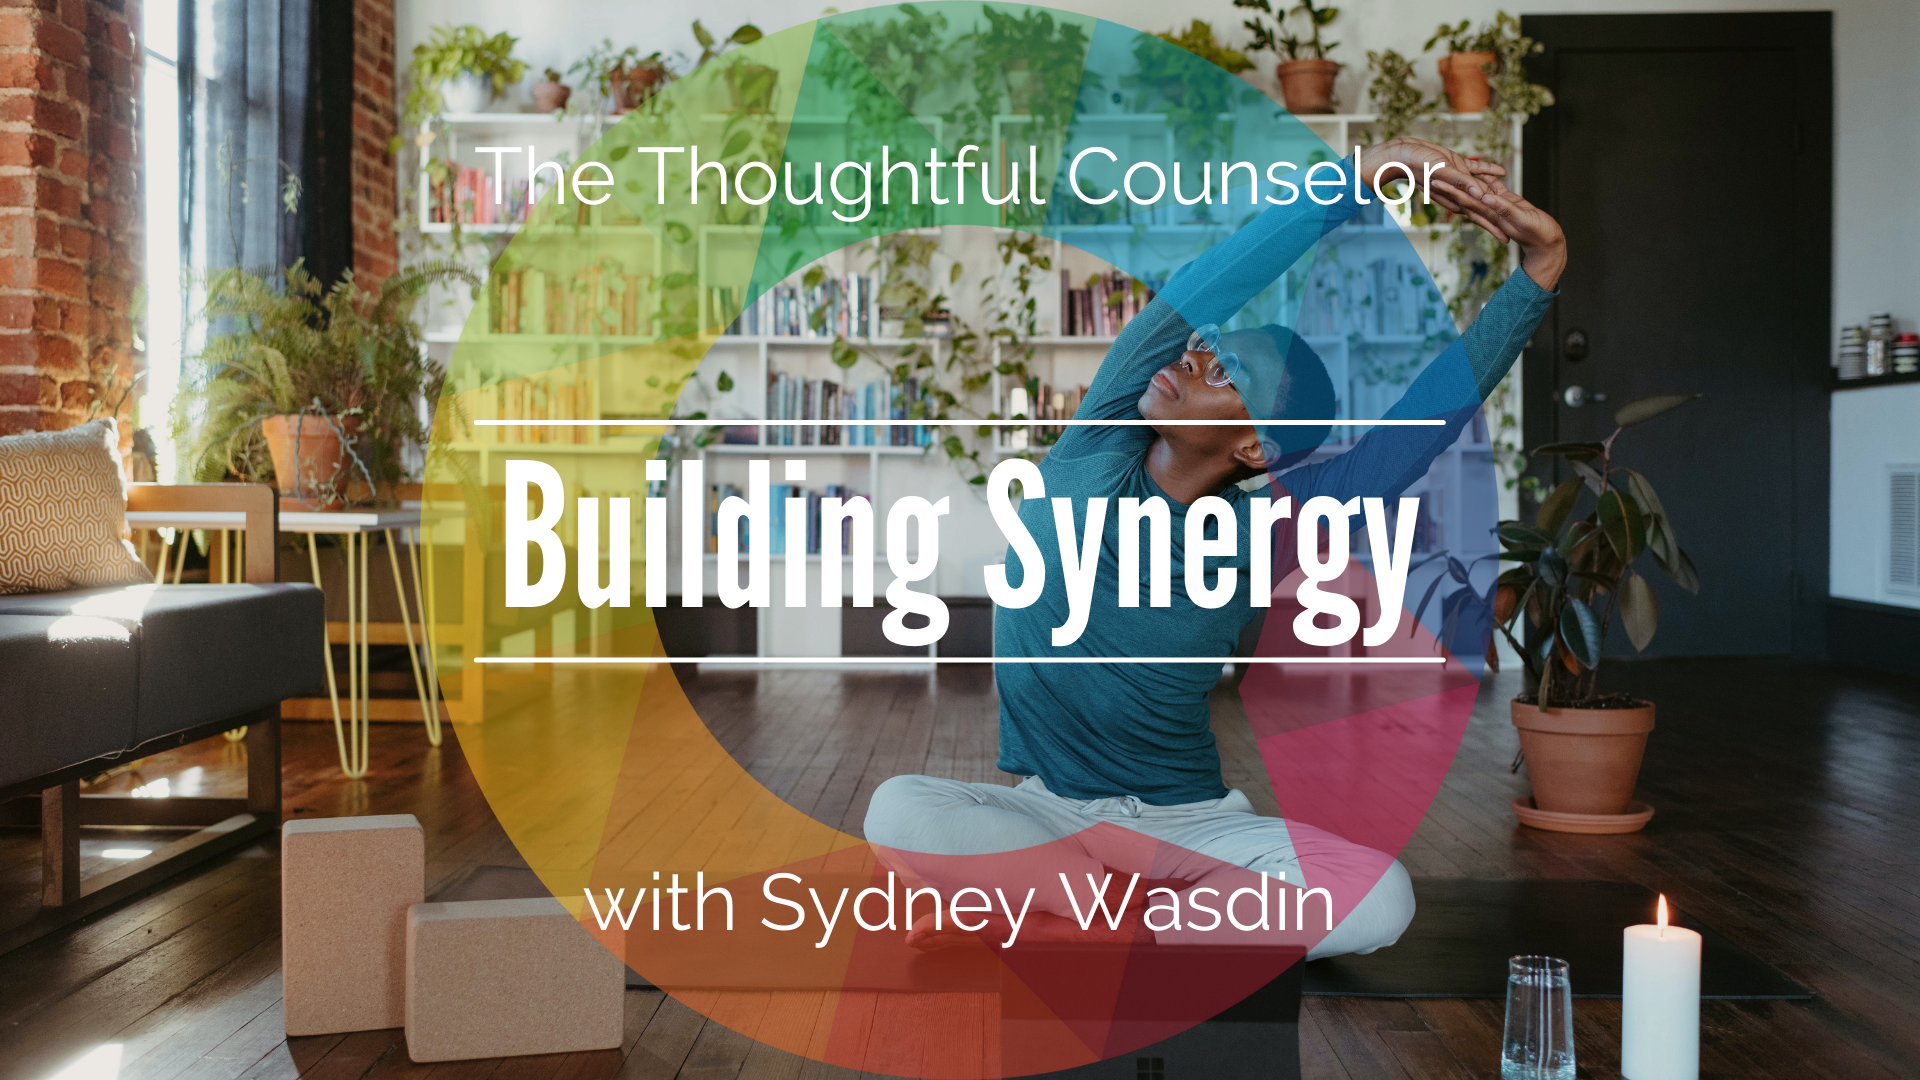 Building Synergy to Mind, Body and Spirit